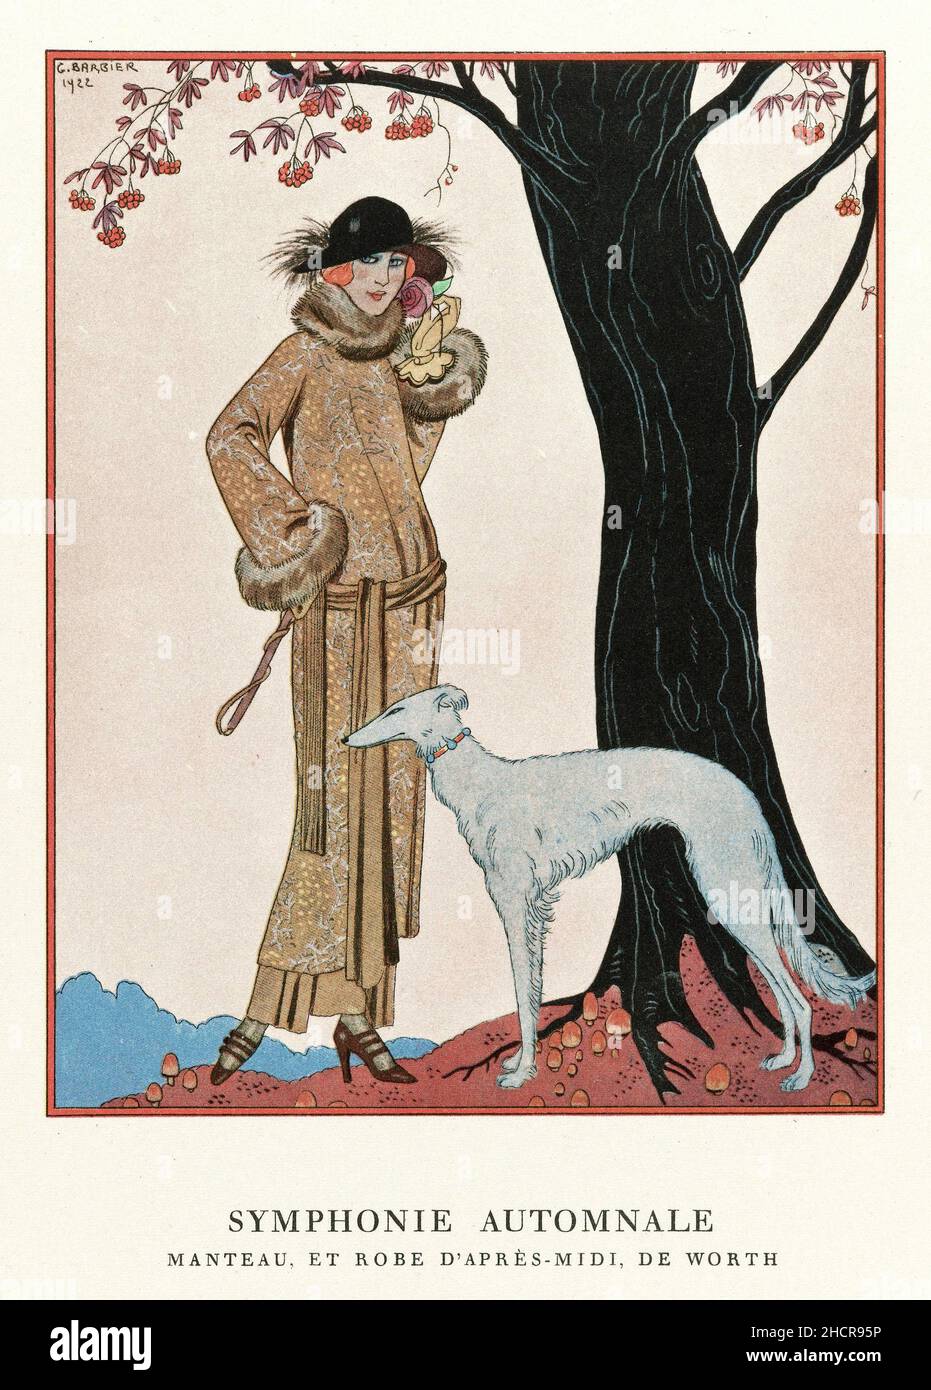 “Symphonie automnale”, a vintage illustration by the French artist, George Barbier (1882–1932), letterpress print, 1922 Stock Photo